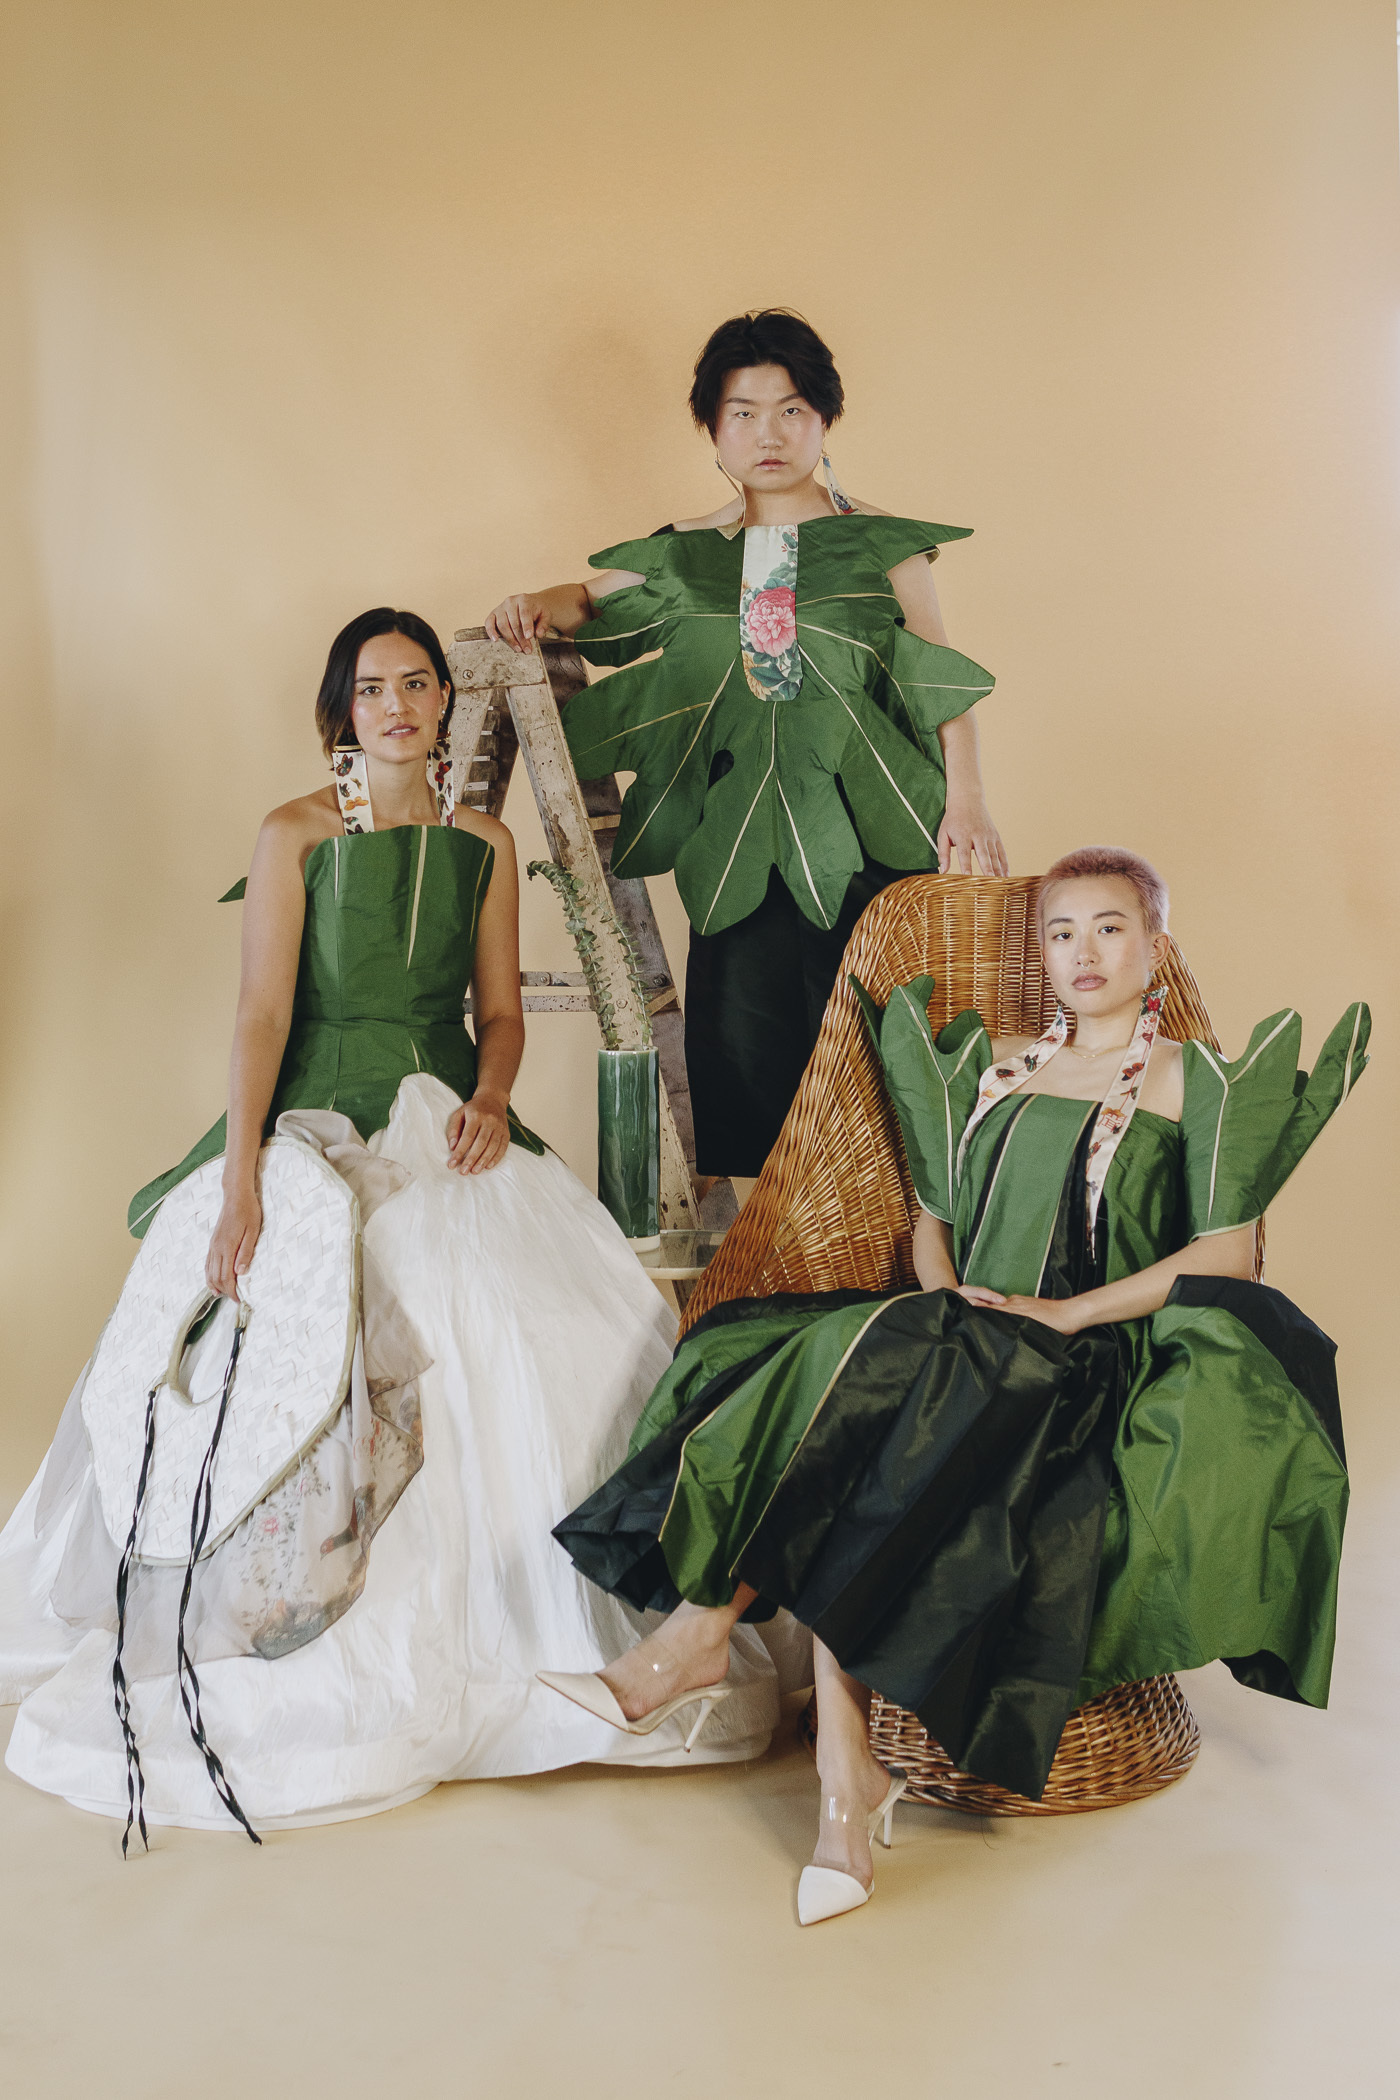 Three individuals wearing large green tetrapanax papyrifer leaf-inspired dresses